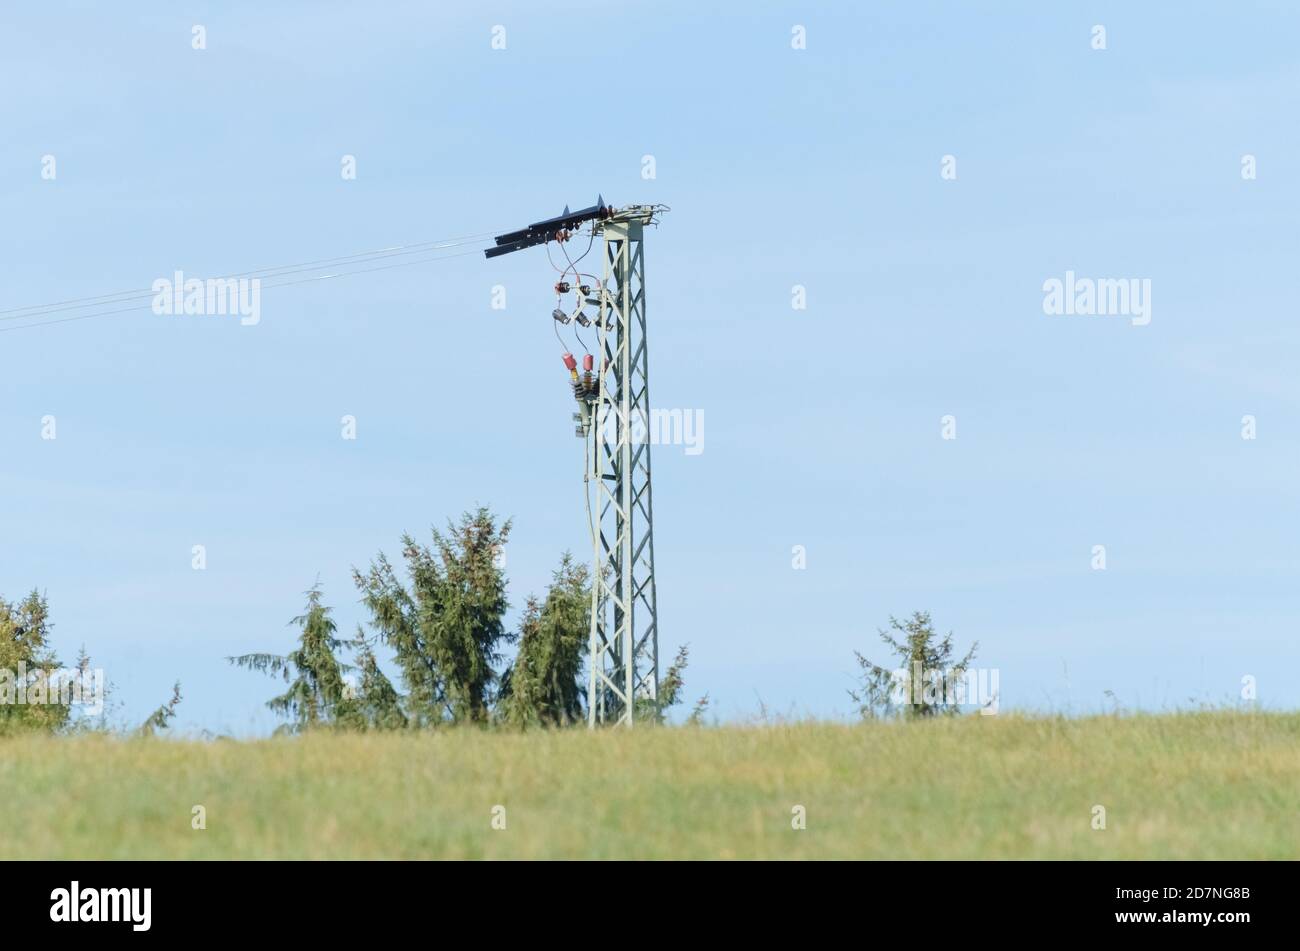 High voltage overhead electrical power line, energy industry, in a rural landscape in the countryside in Germany, Western Europe Stock Photo